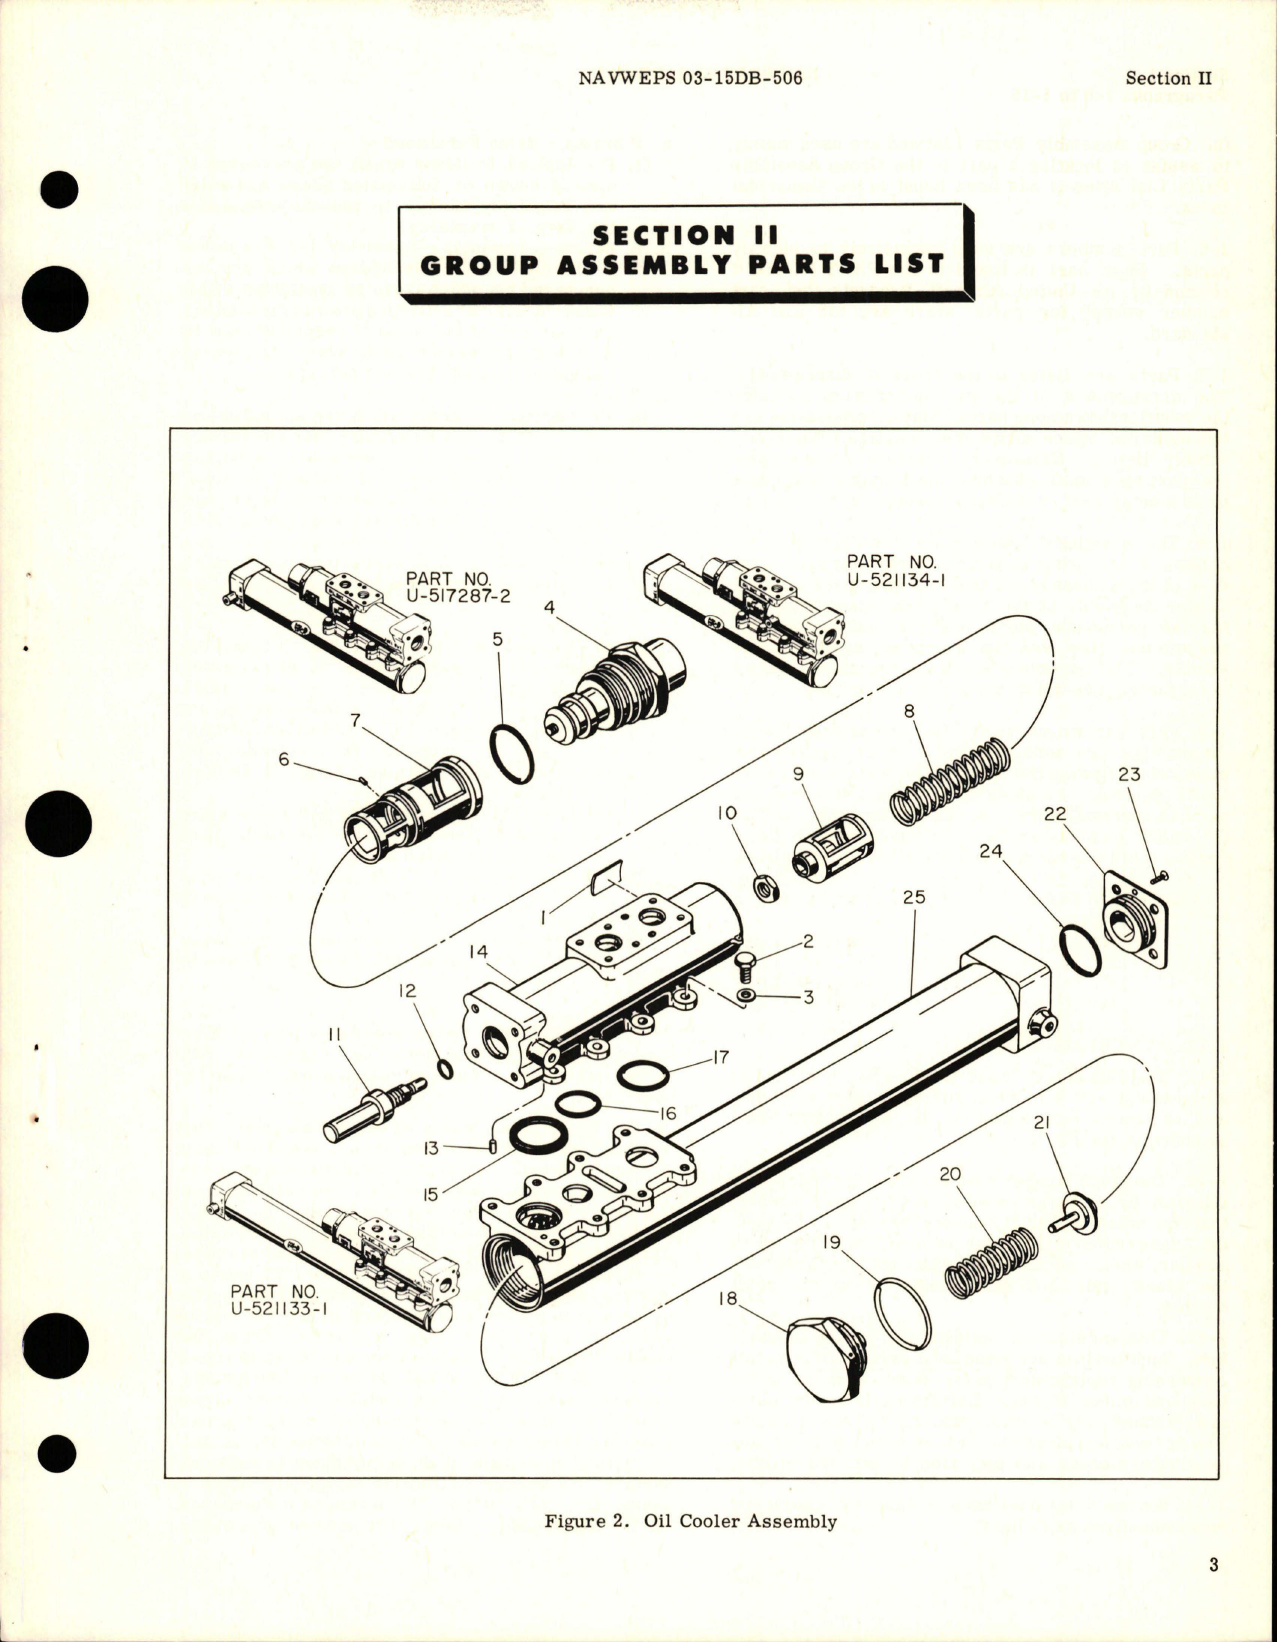 Sample page 5 from AirCorps Library document: Illustrated Parts Breakdown for Oil Cooler Assembly - Parts U-517286-2, U-517287-2, U-521133-1, and U-521134-1